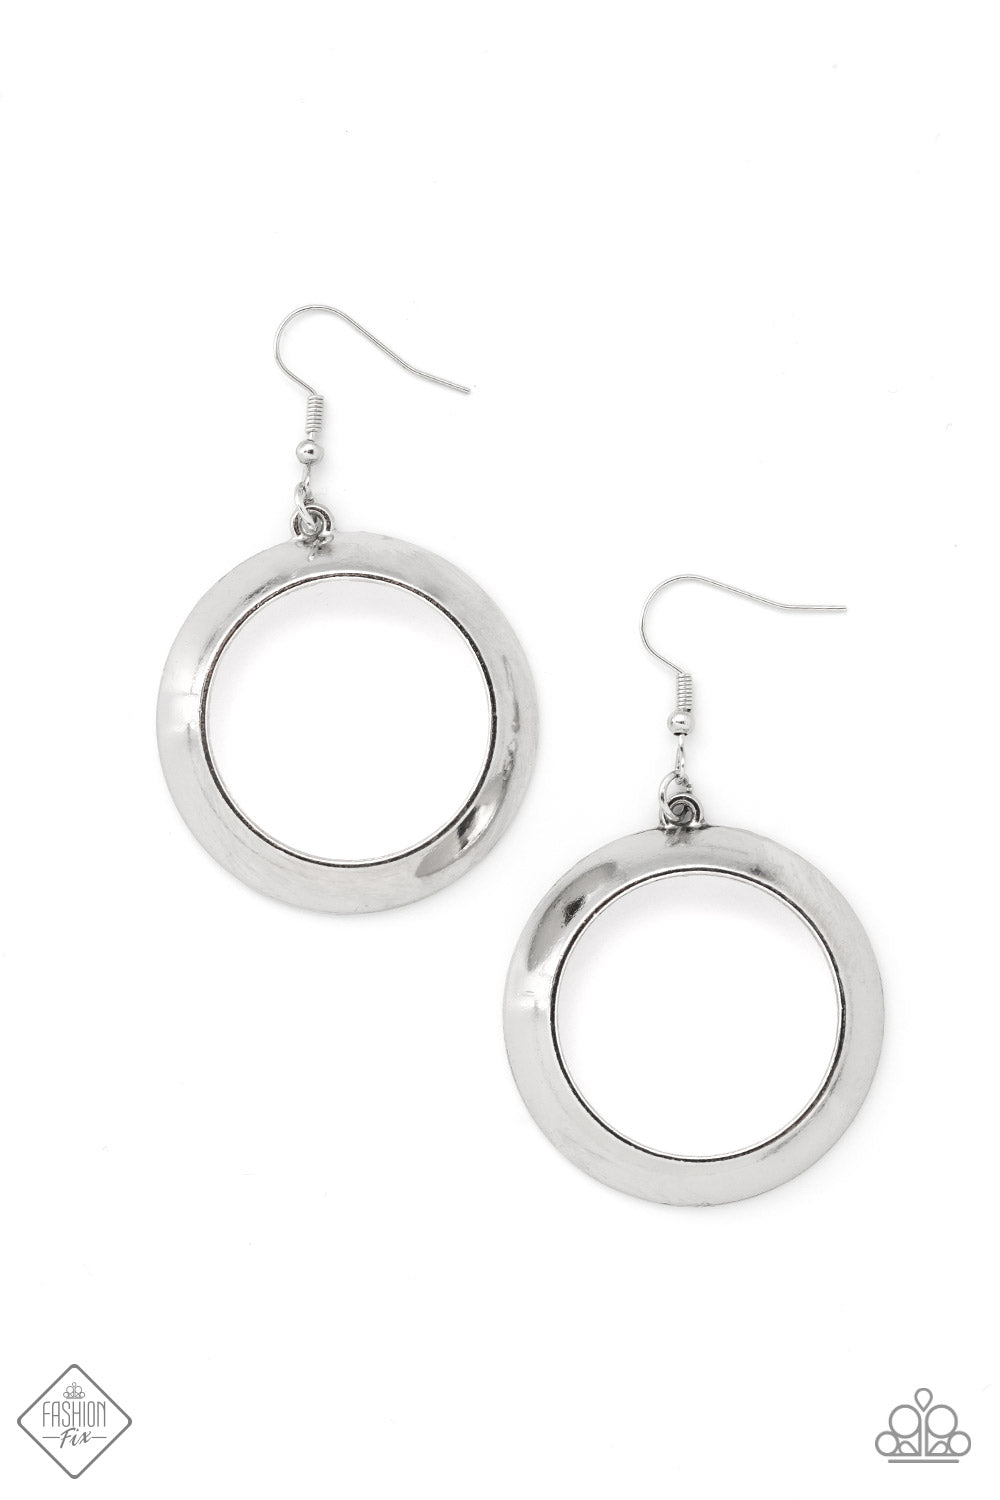 Authentic Appeal Silver Earring